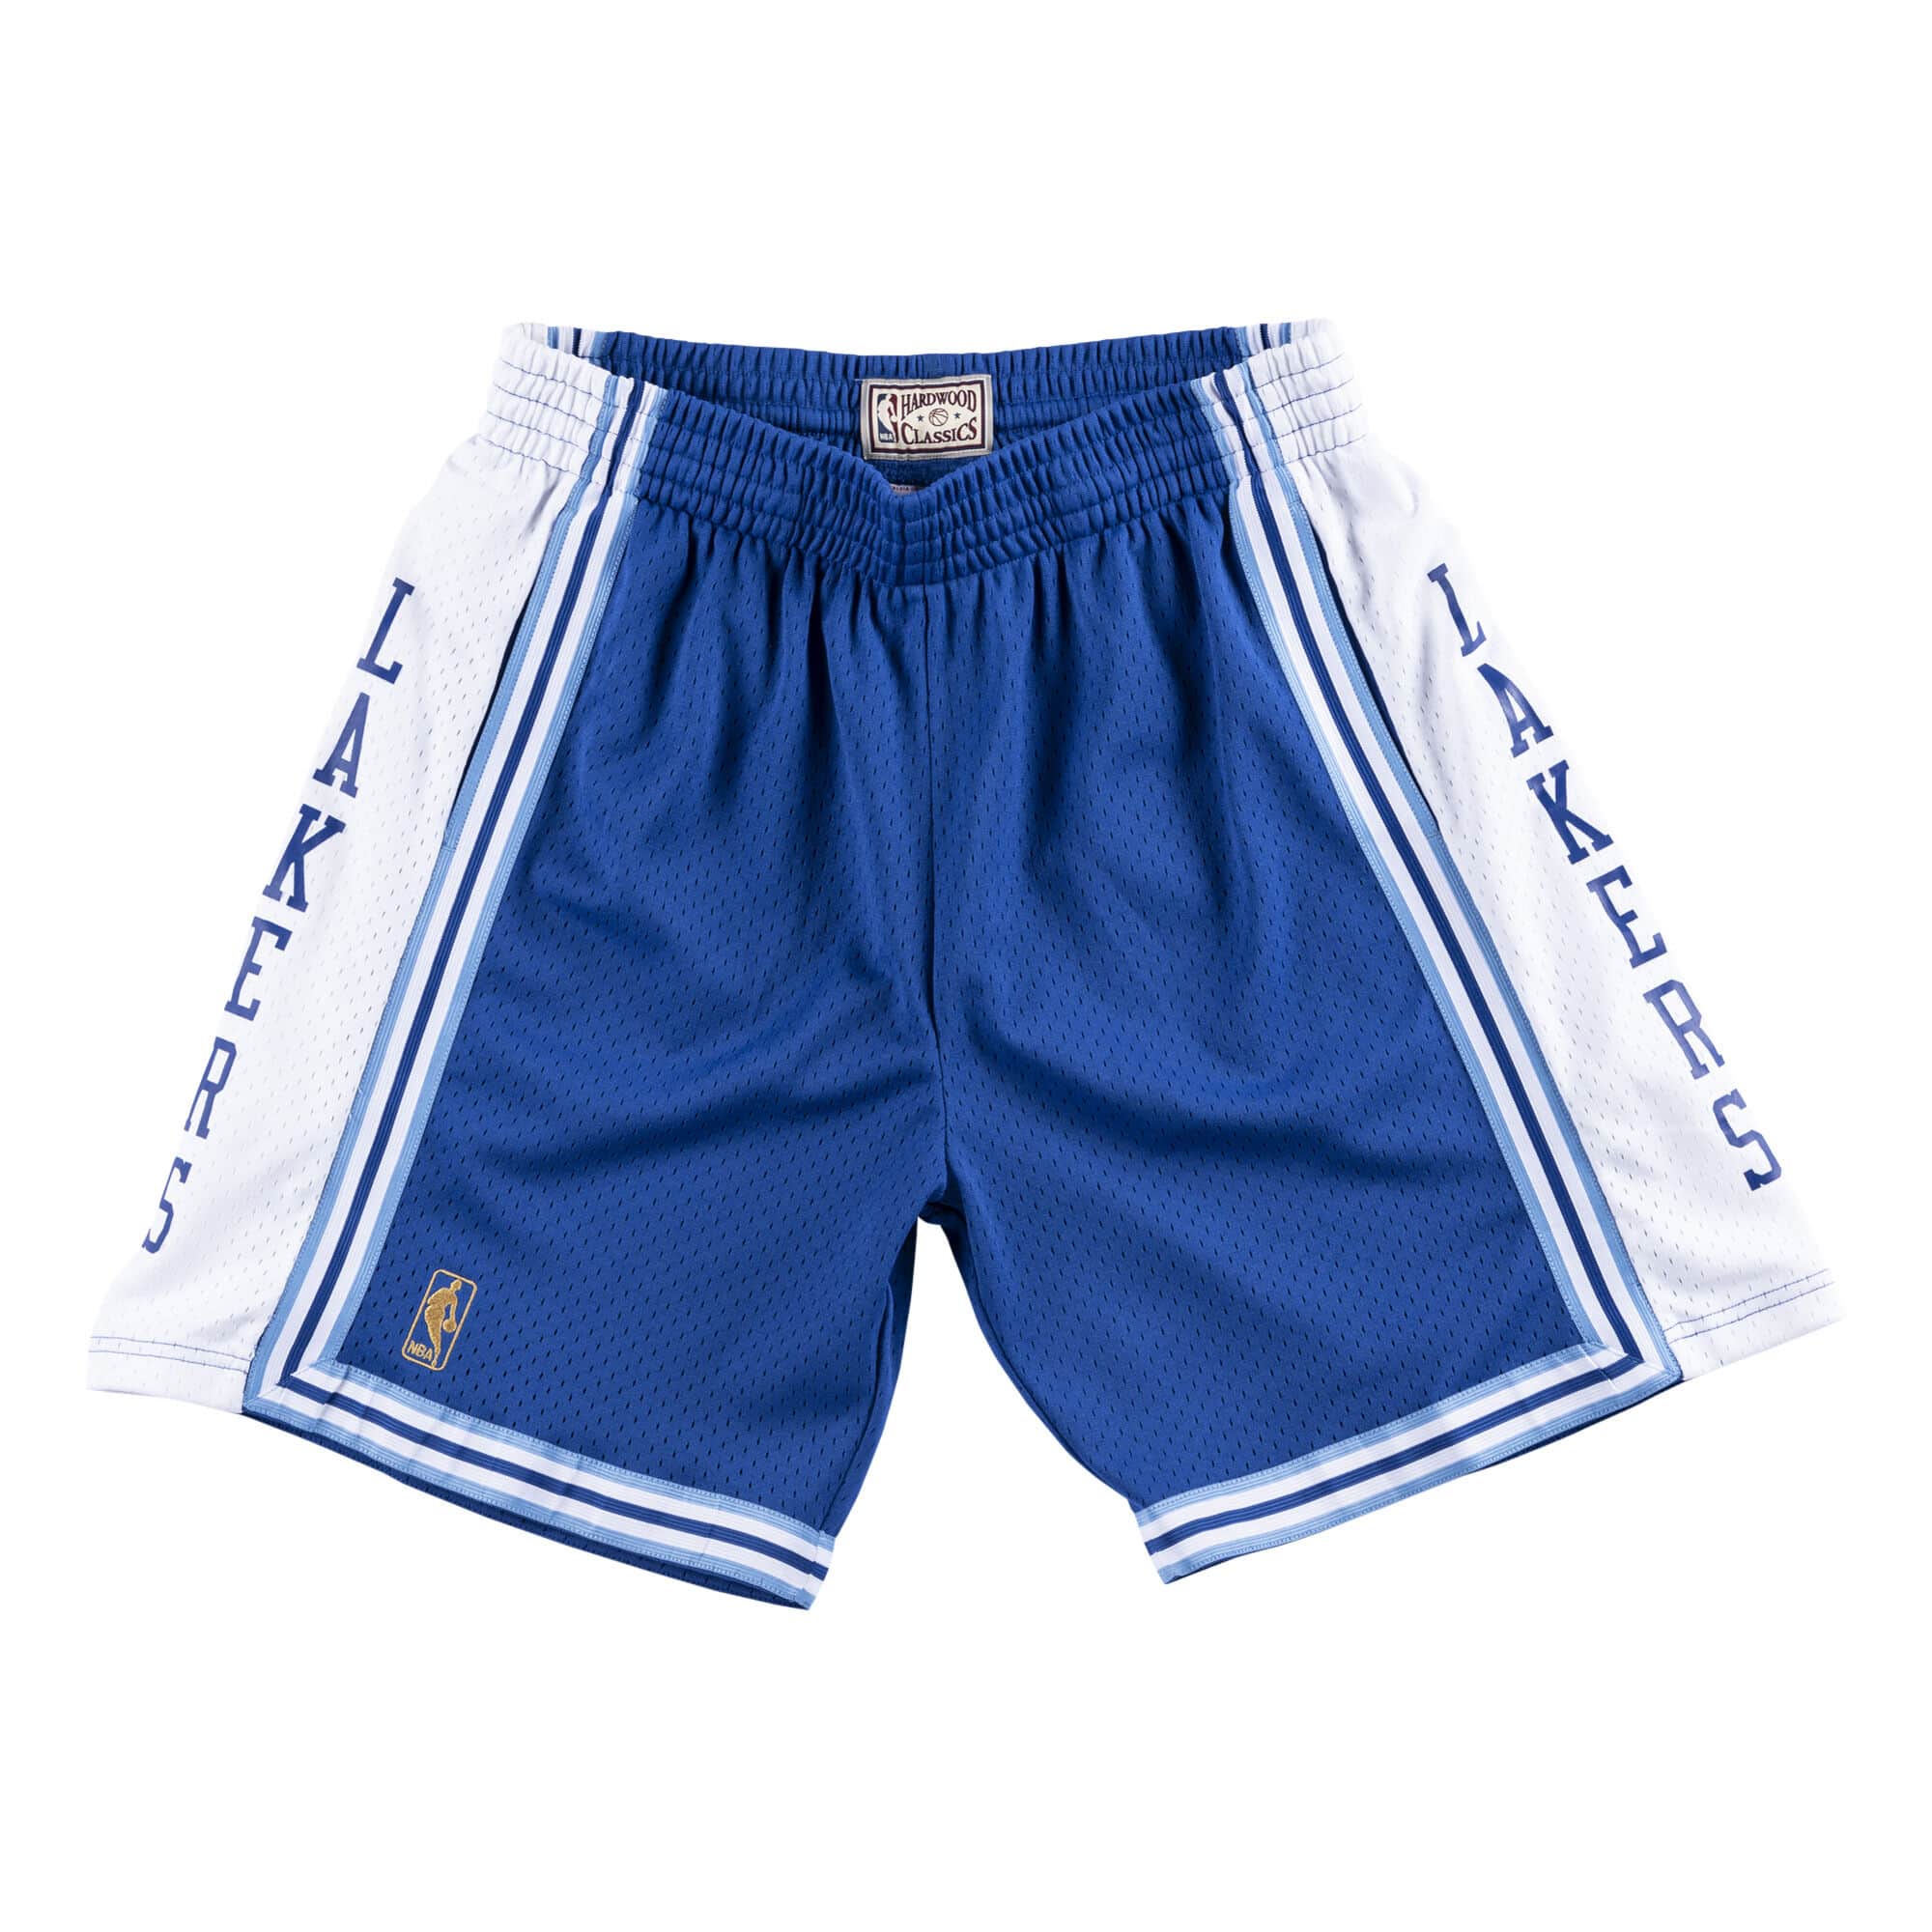 Mitchell & Ness Blue/White Los Angeles Lakers 2009/2010 Hardwood Classics Authentic Shorts